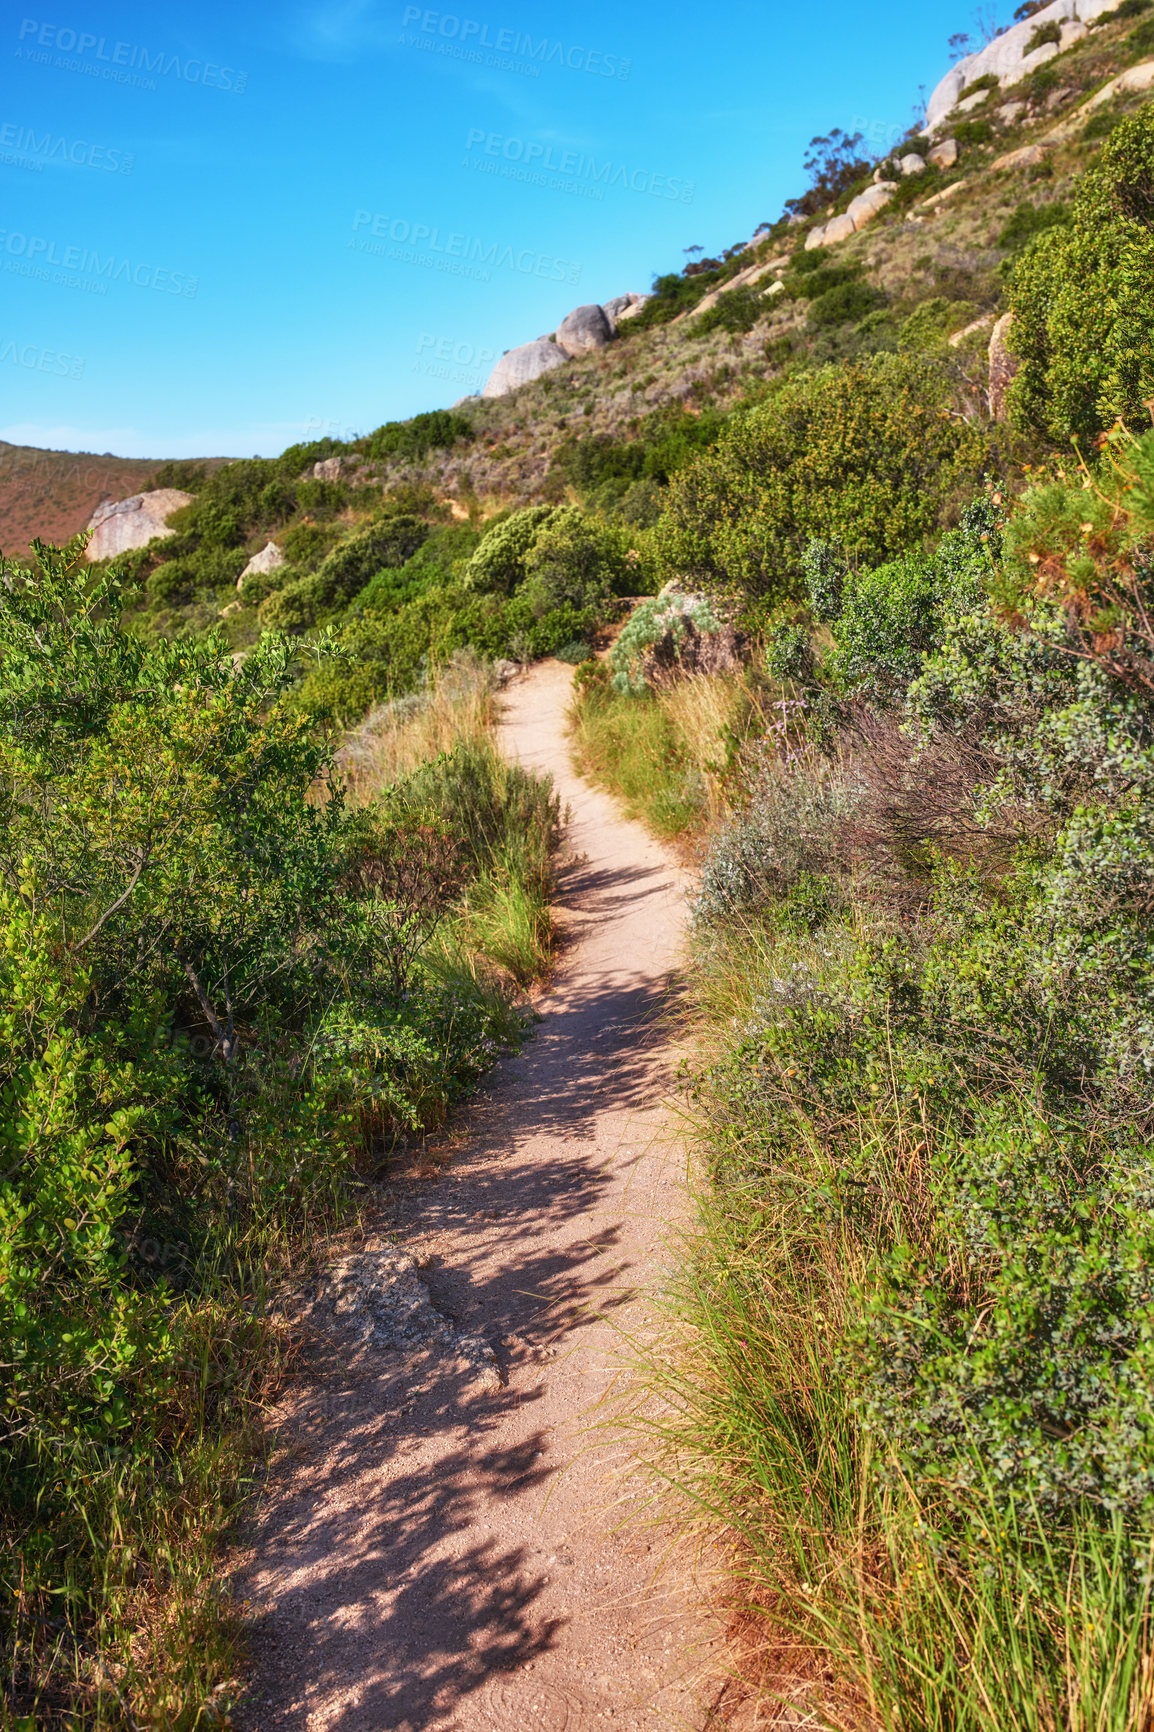 Buy stock photo Remote mountain hiking trail on Table Mountain. Mountainous walking path surrounded by bushes and trees on a mountaintop or peak. Popular walking trails and tourist attraction to explore in Cape Town